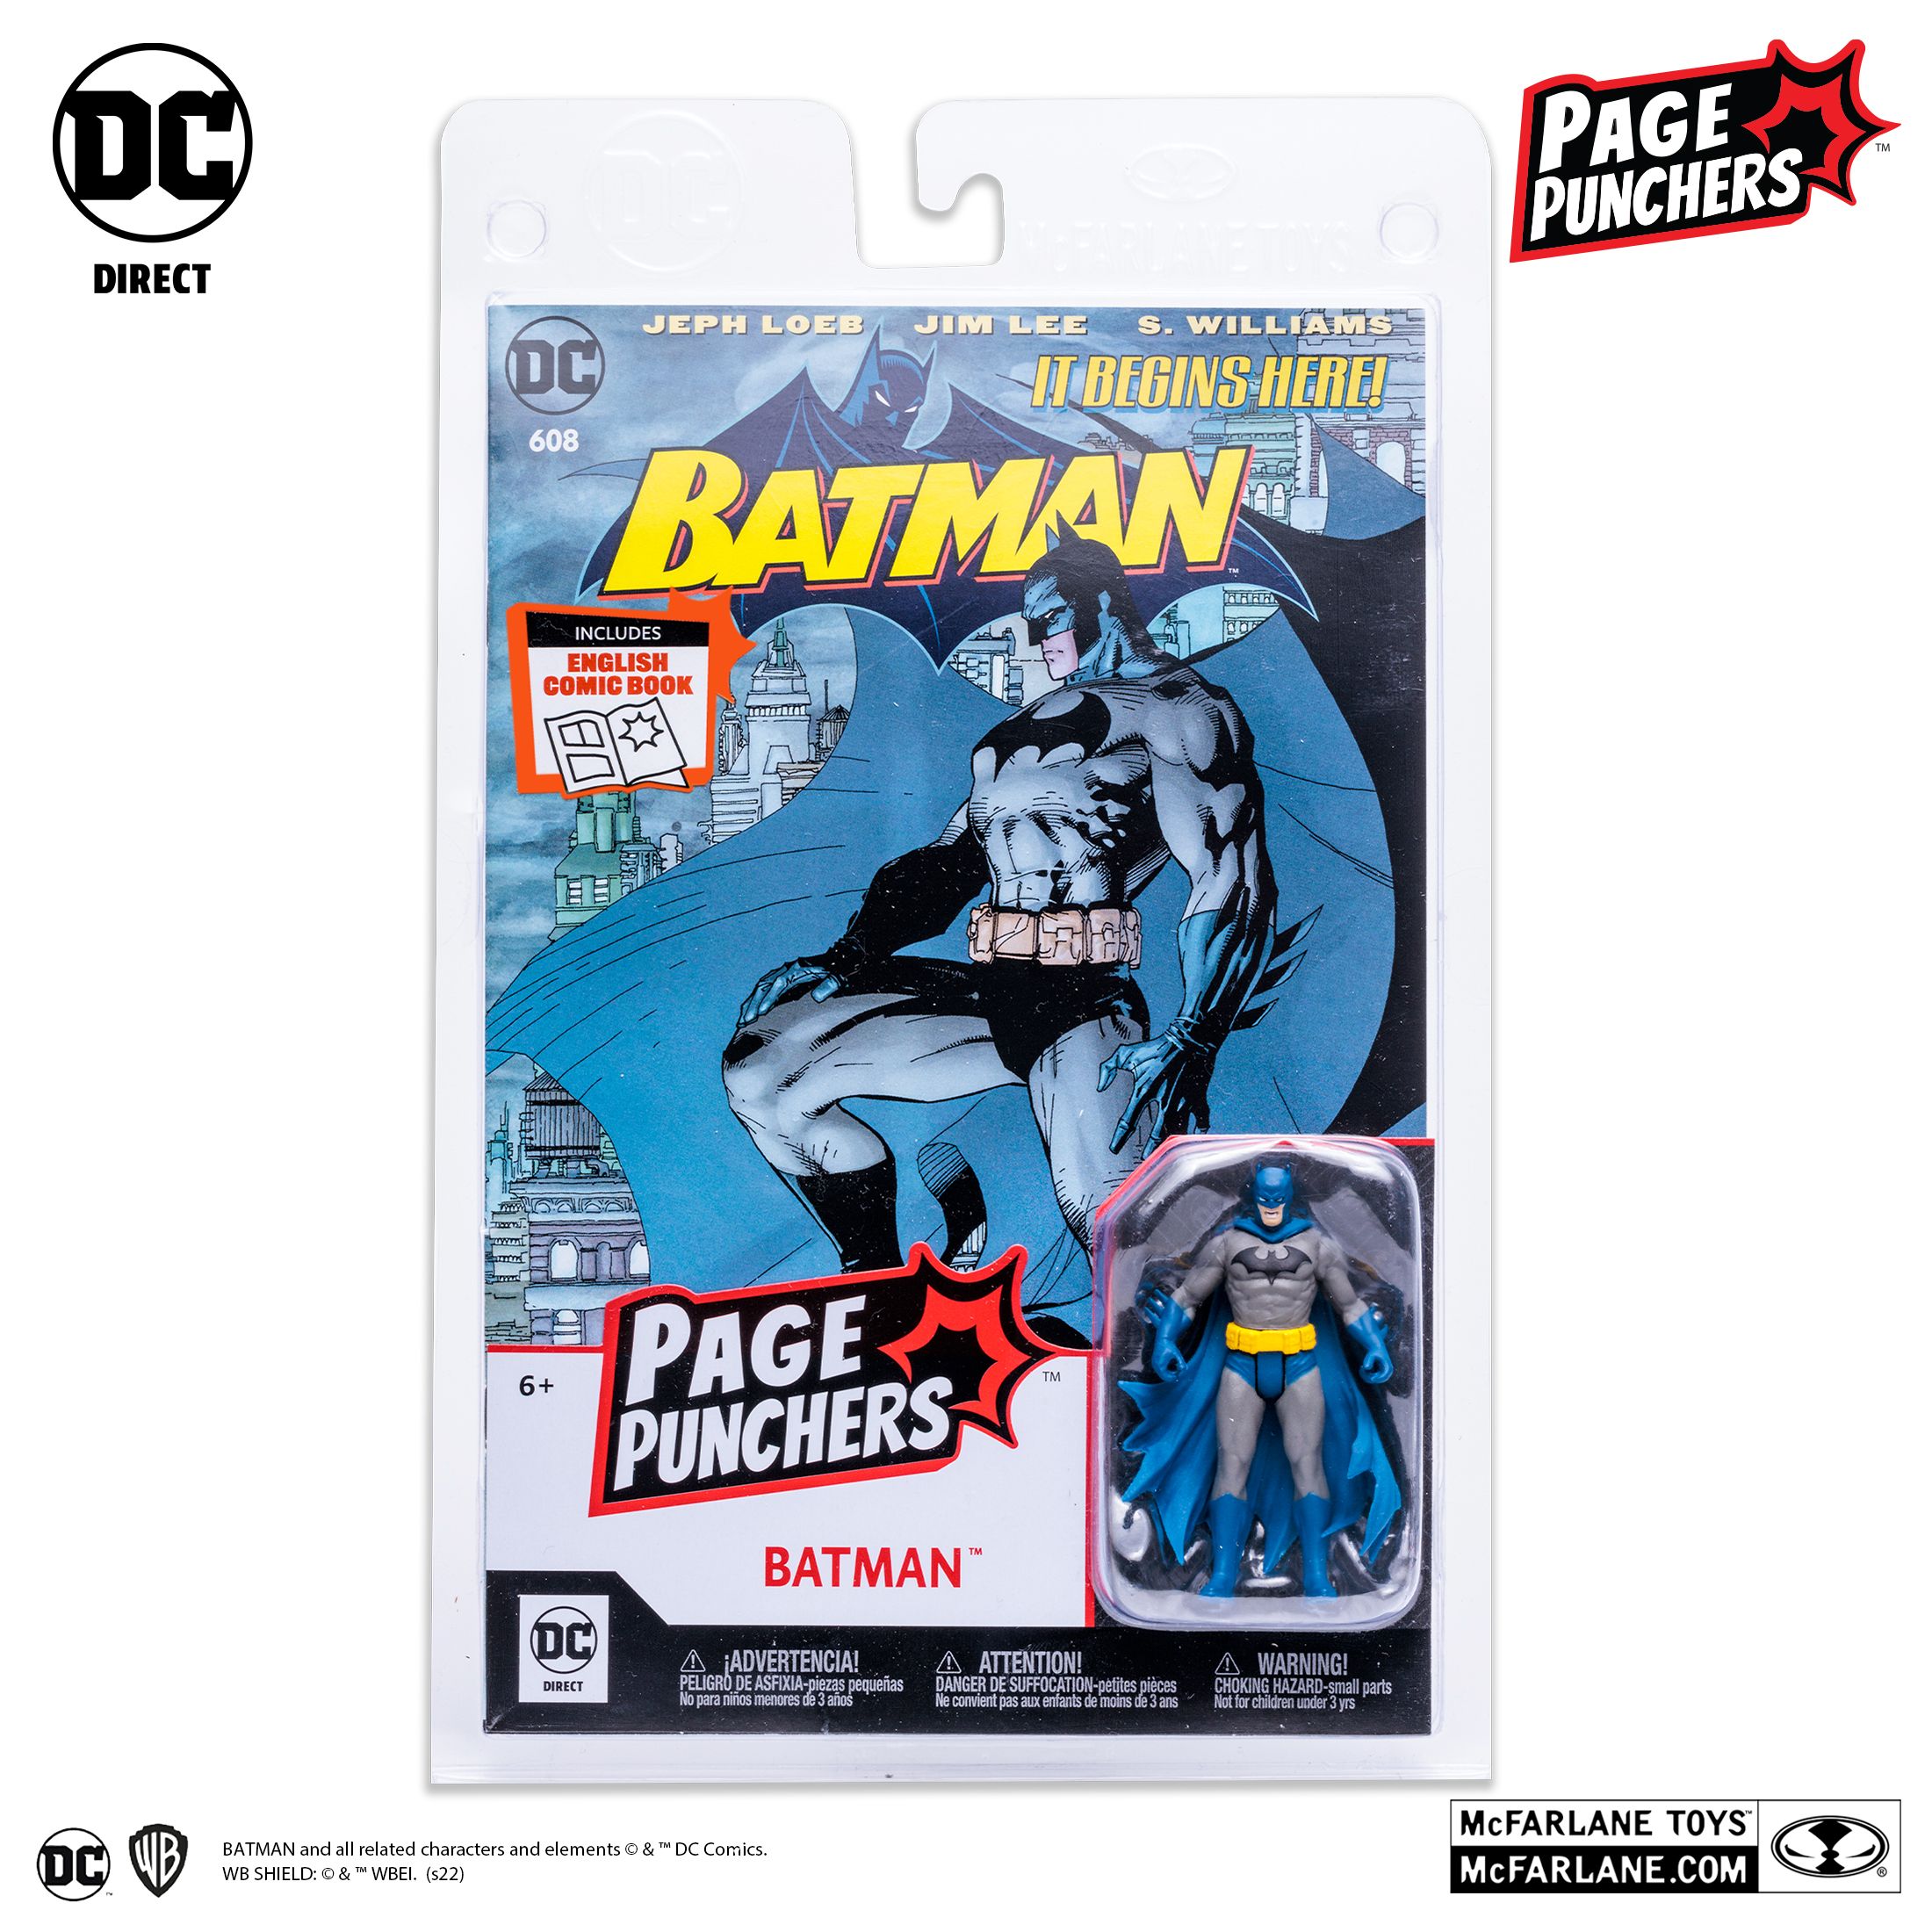 McFarlane Toys Debuts $9.99 DC Page Punchers Action Figure Line